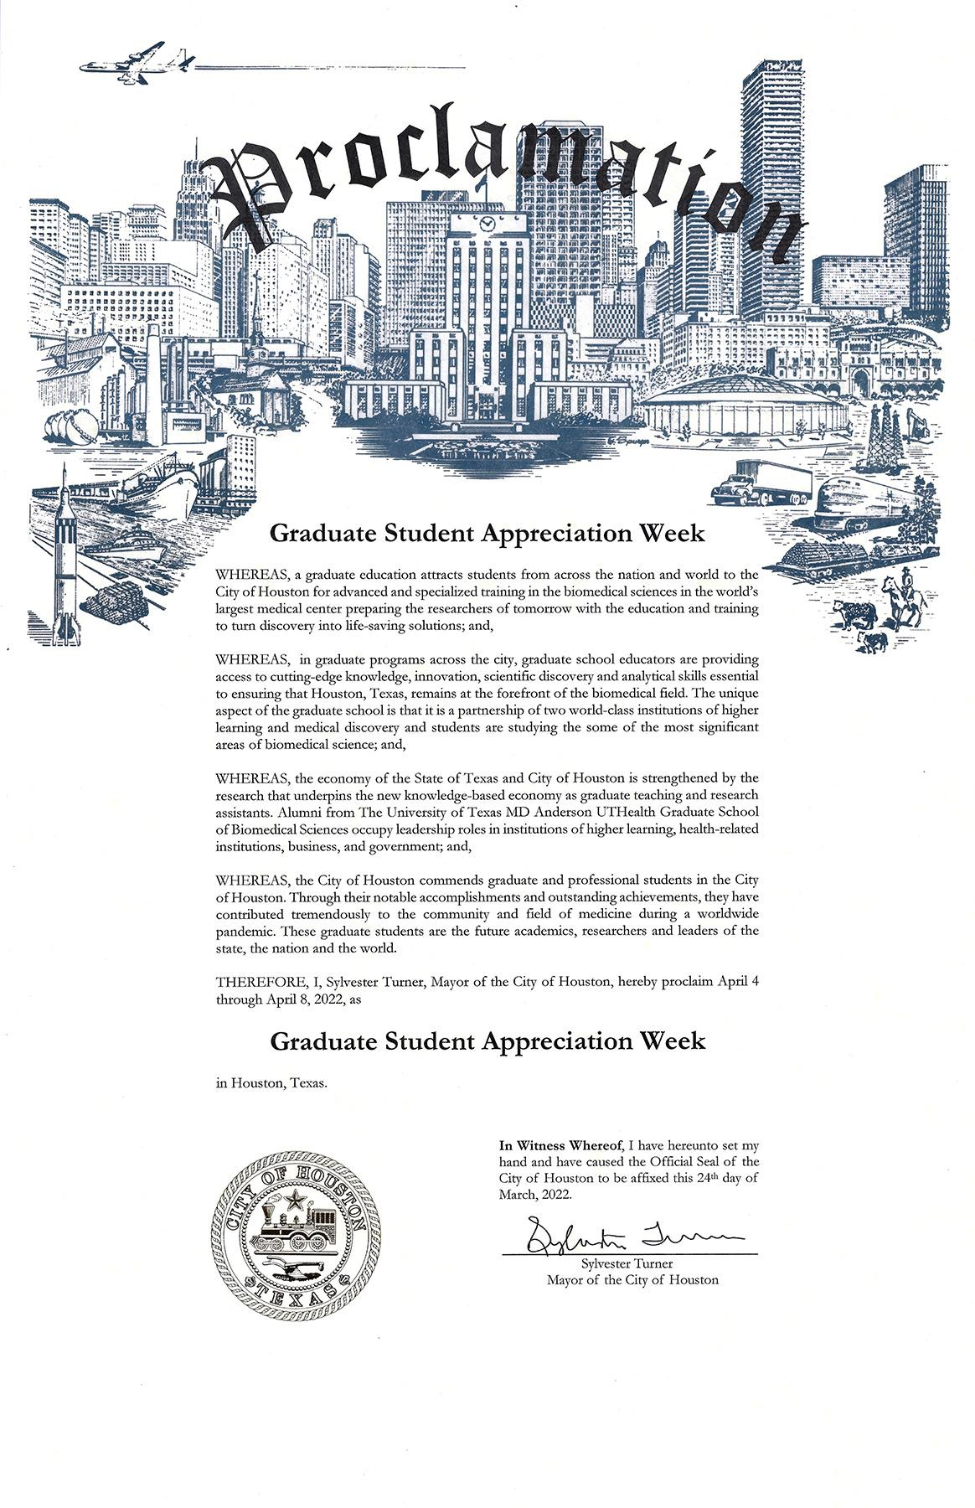 Image of the GSAW proclamation from the City of Houston